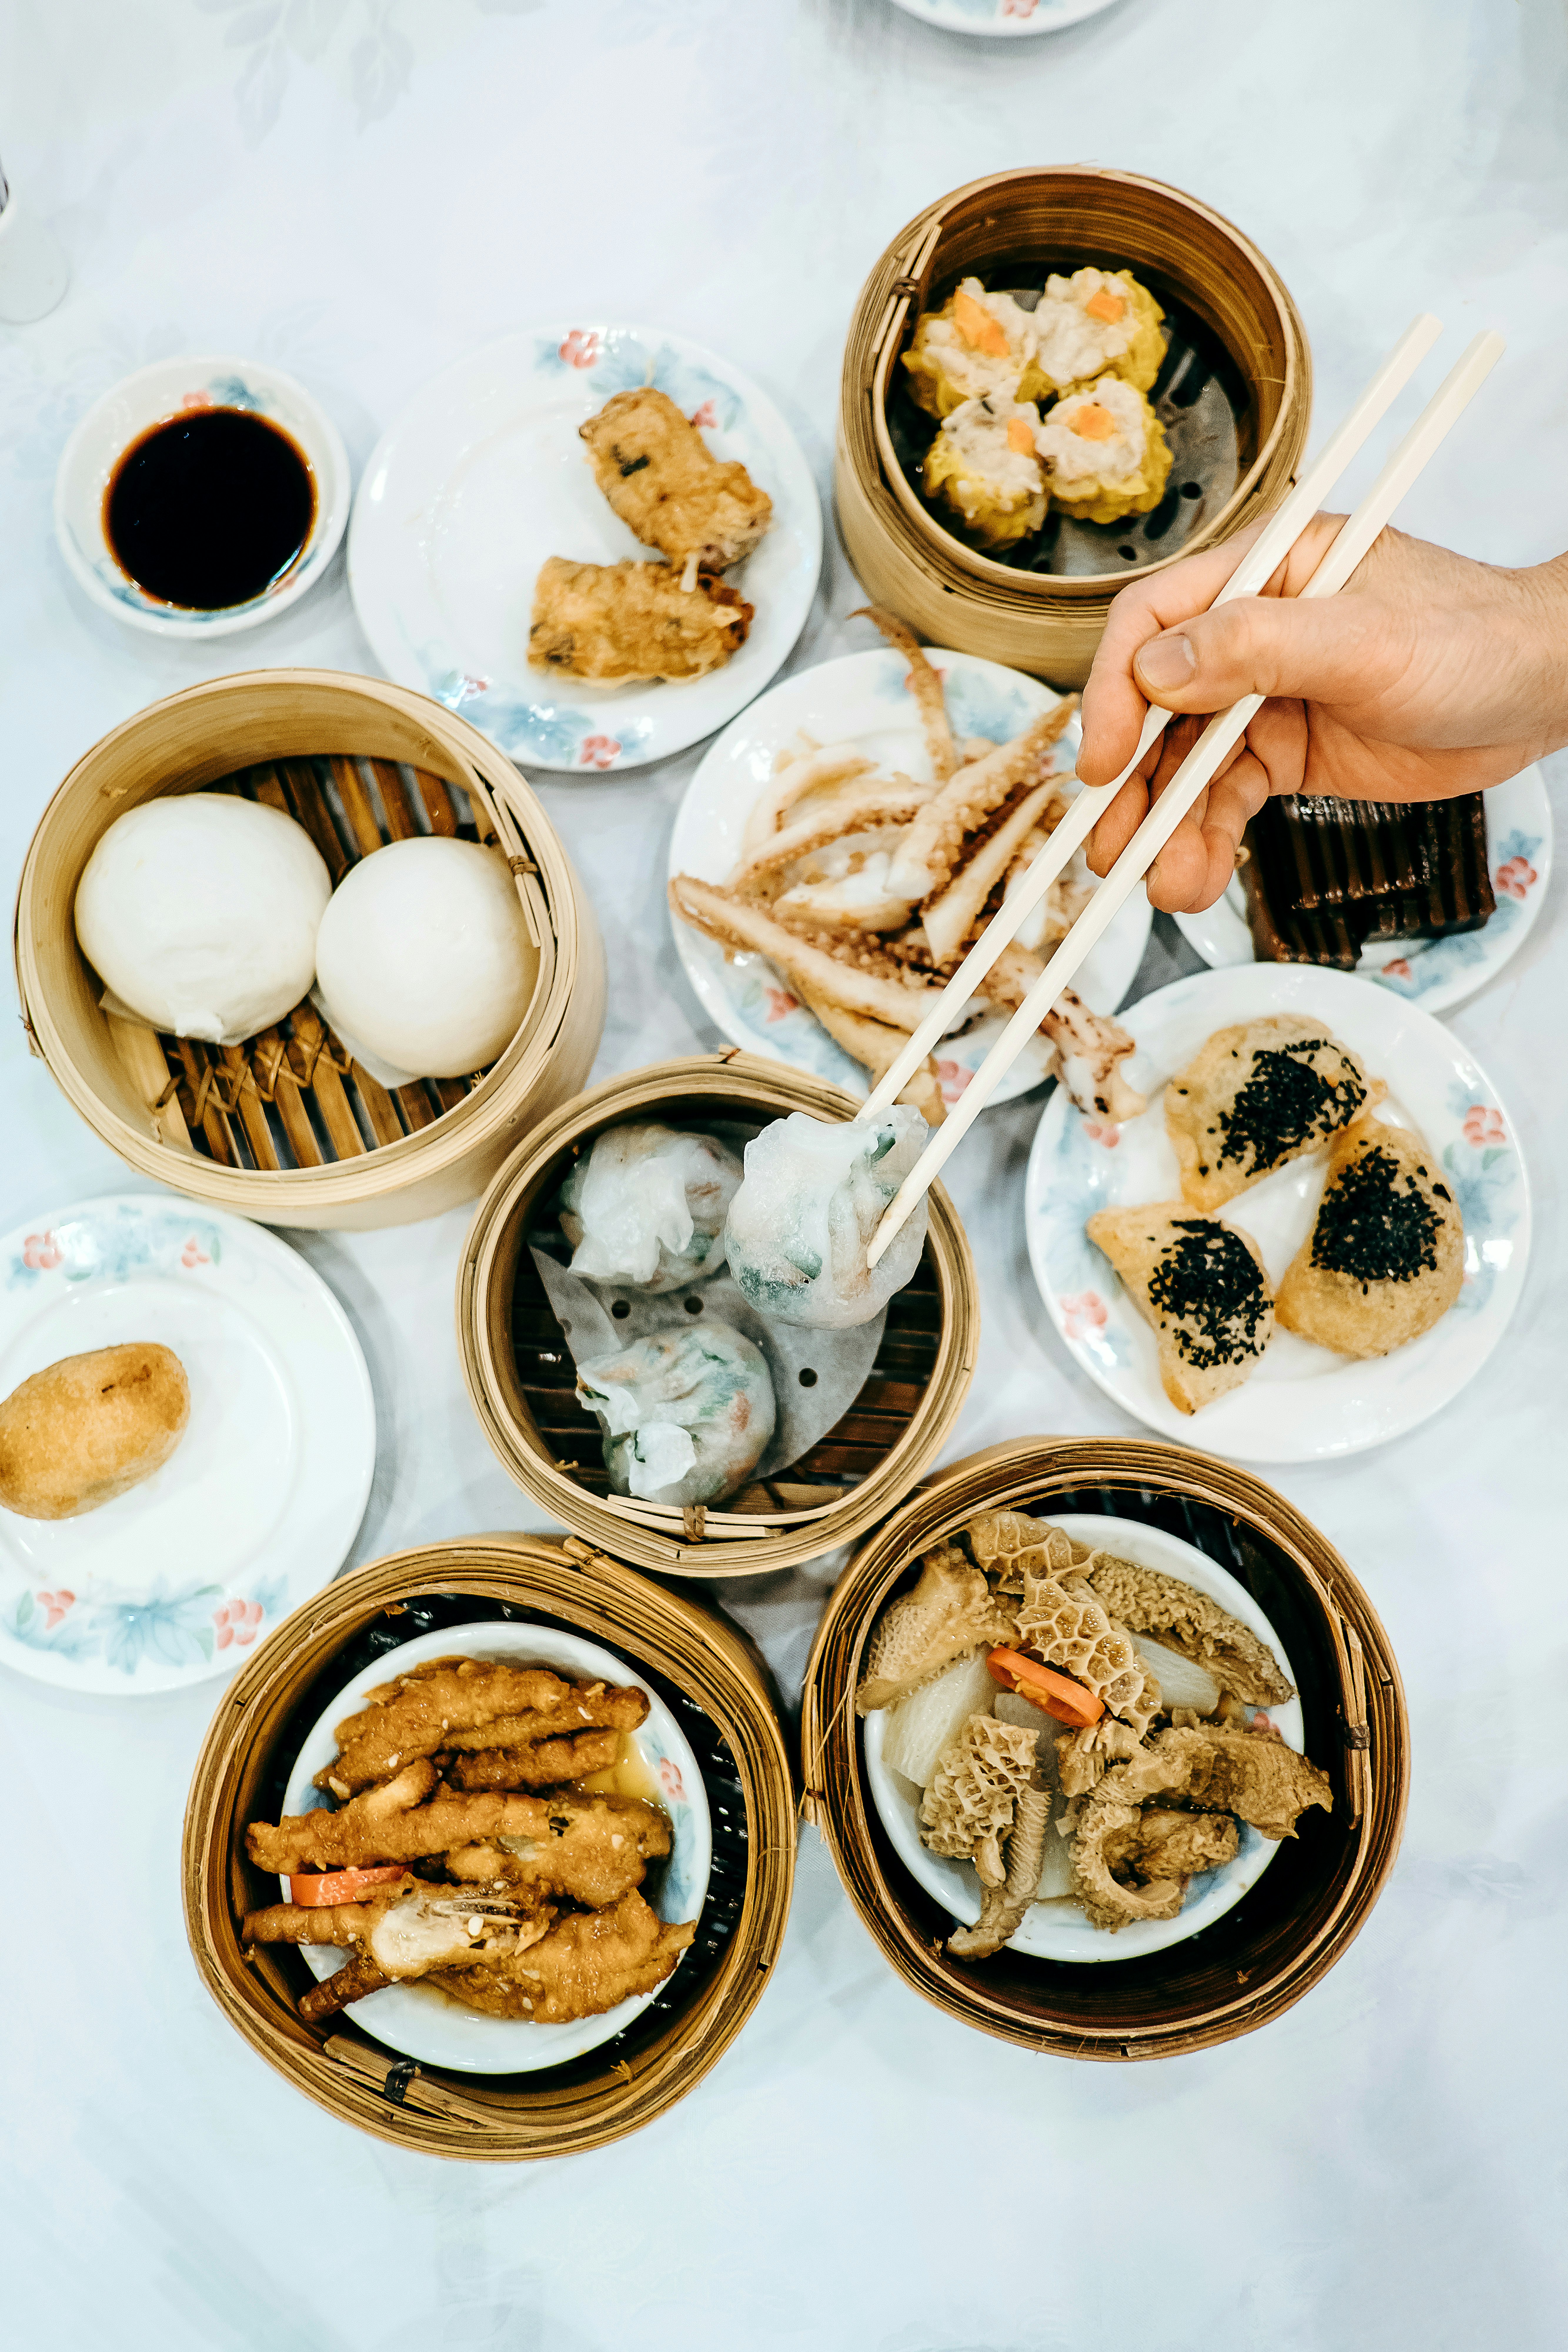 A variety of traditional dim sum served at a Hong Kong restaurant with a hand holding chopsticks reaching over the food. 